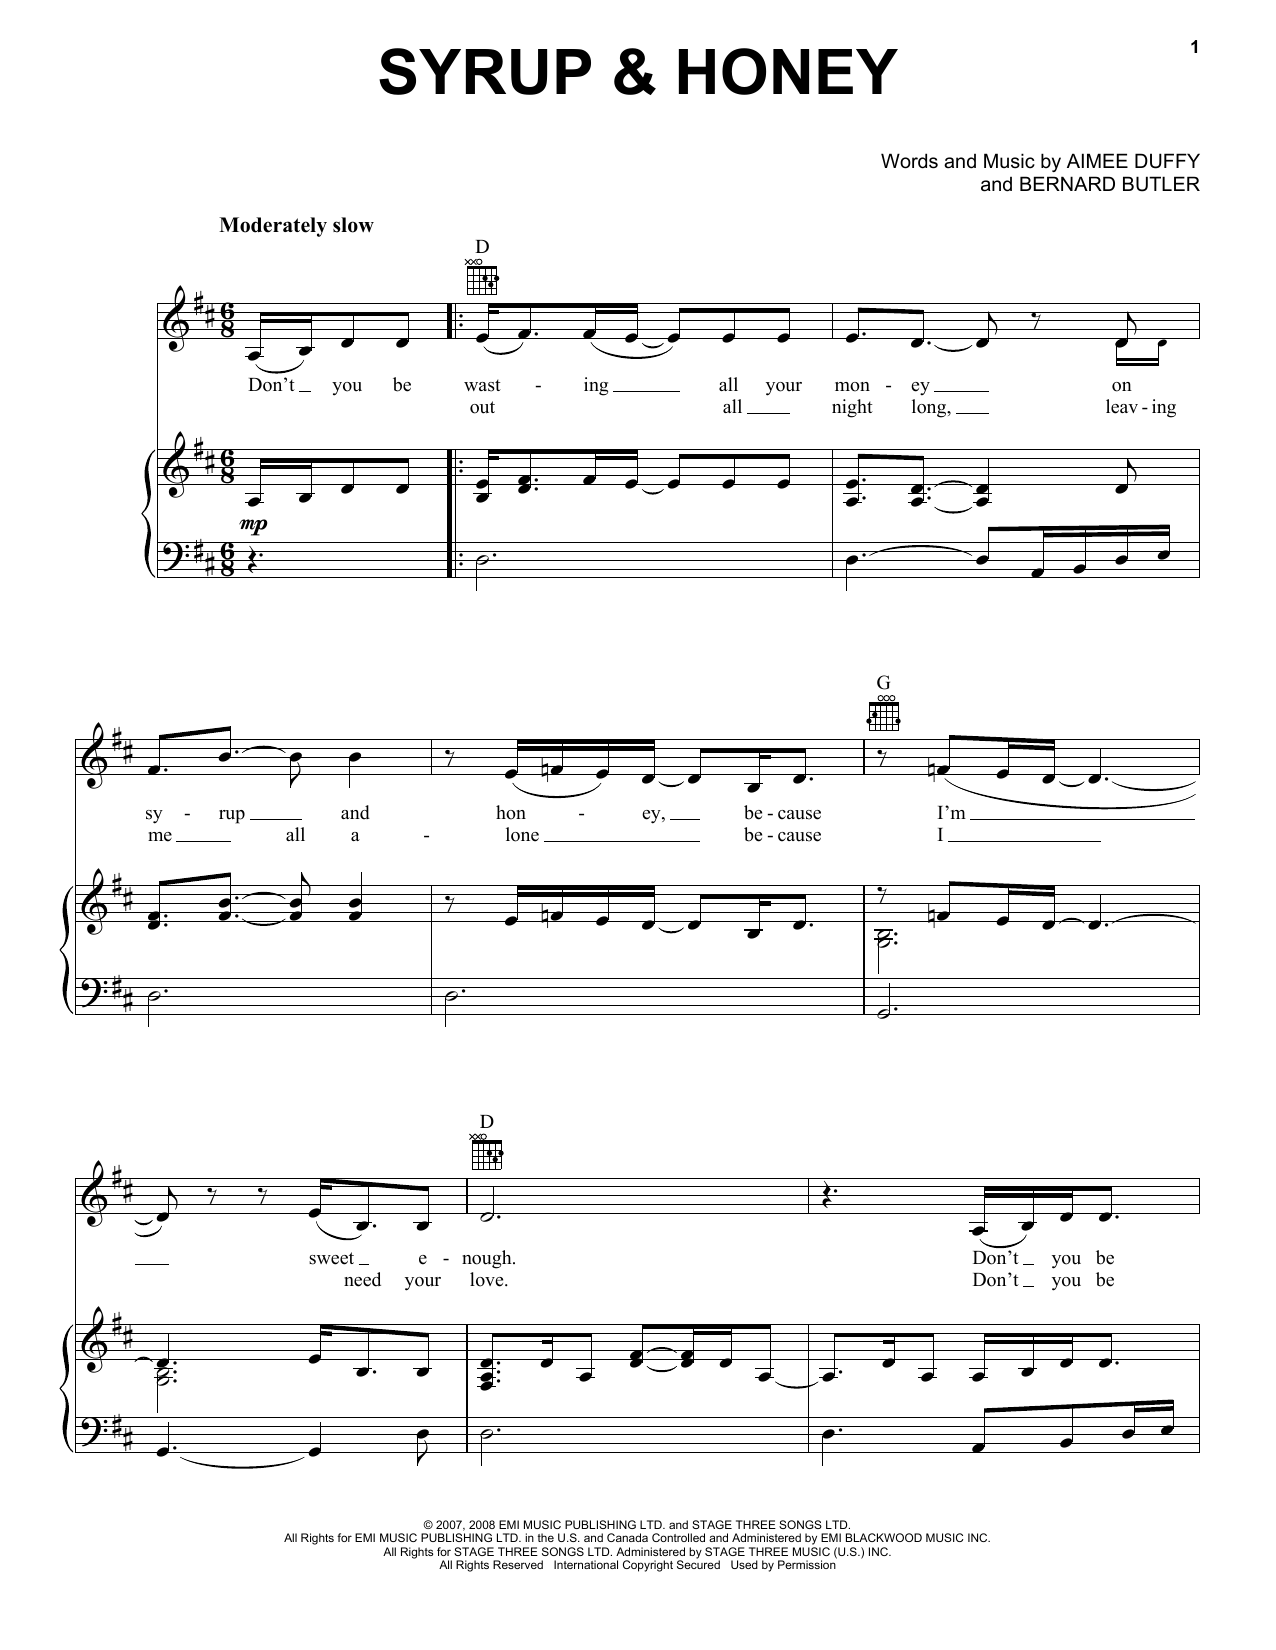 Download Duffy Syrup & Honey Sheet Music